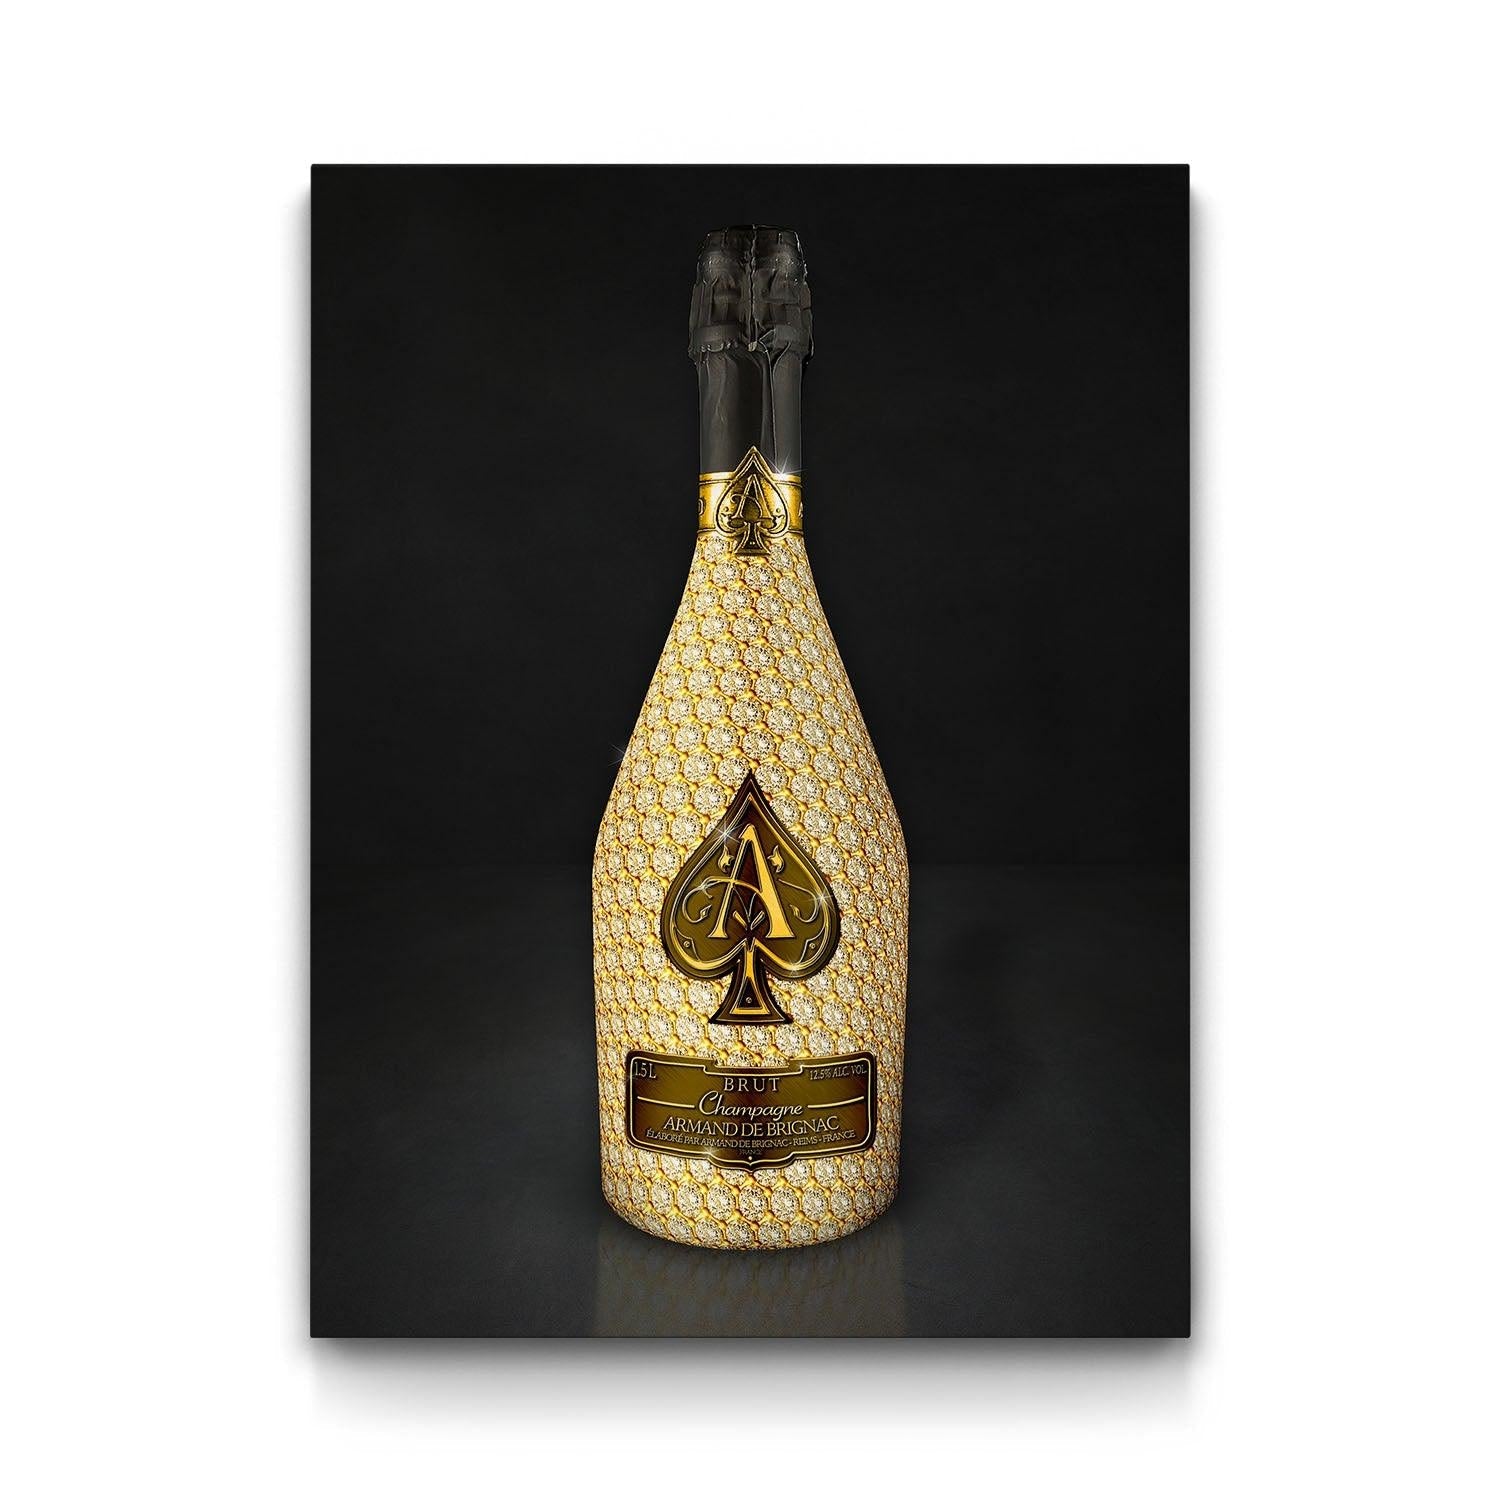 Jay Z buys 'Ace of Spades' luxury Champagne label